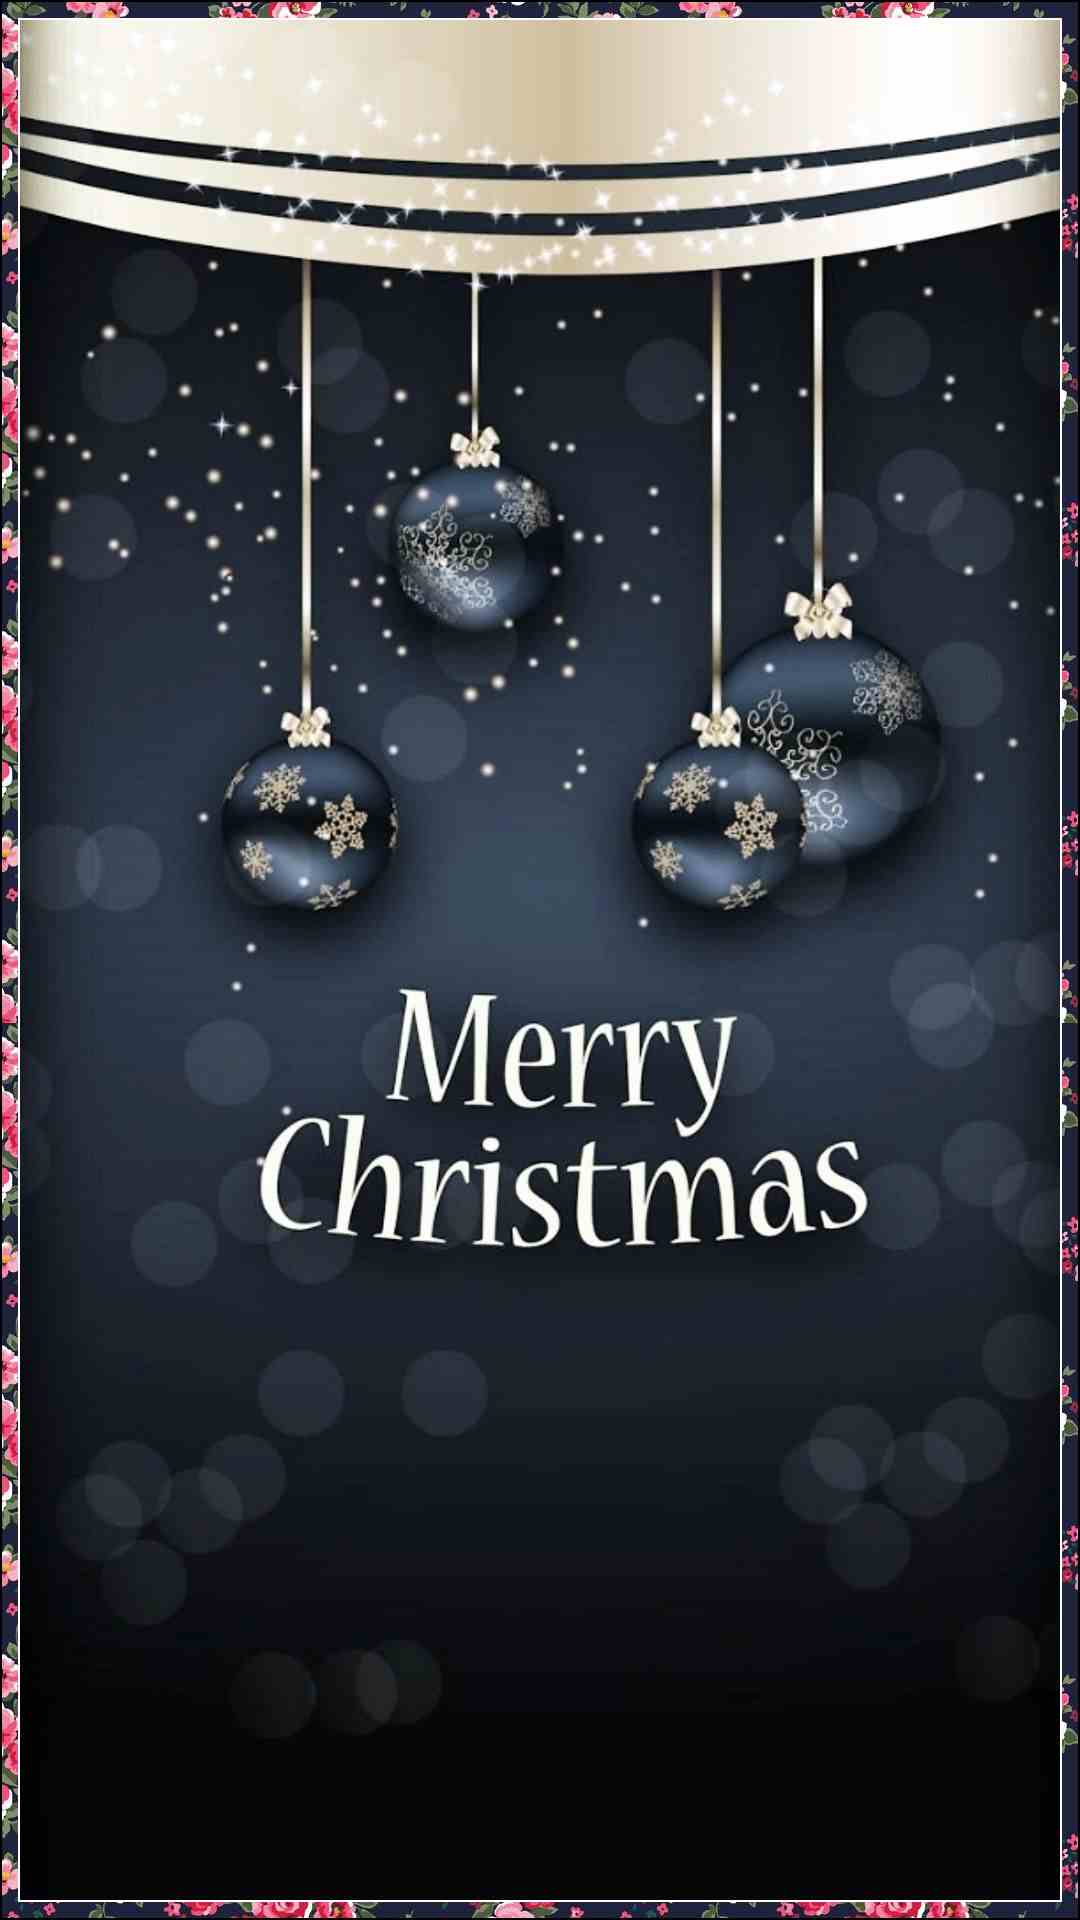 free merry christmas images download
